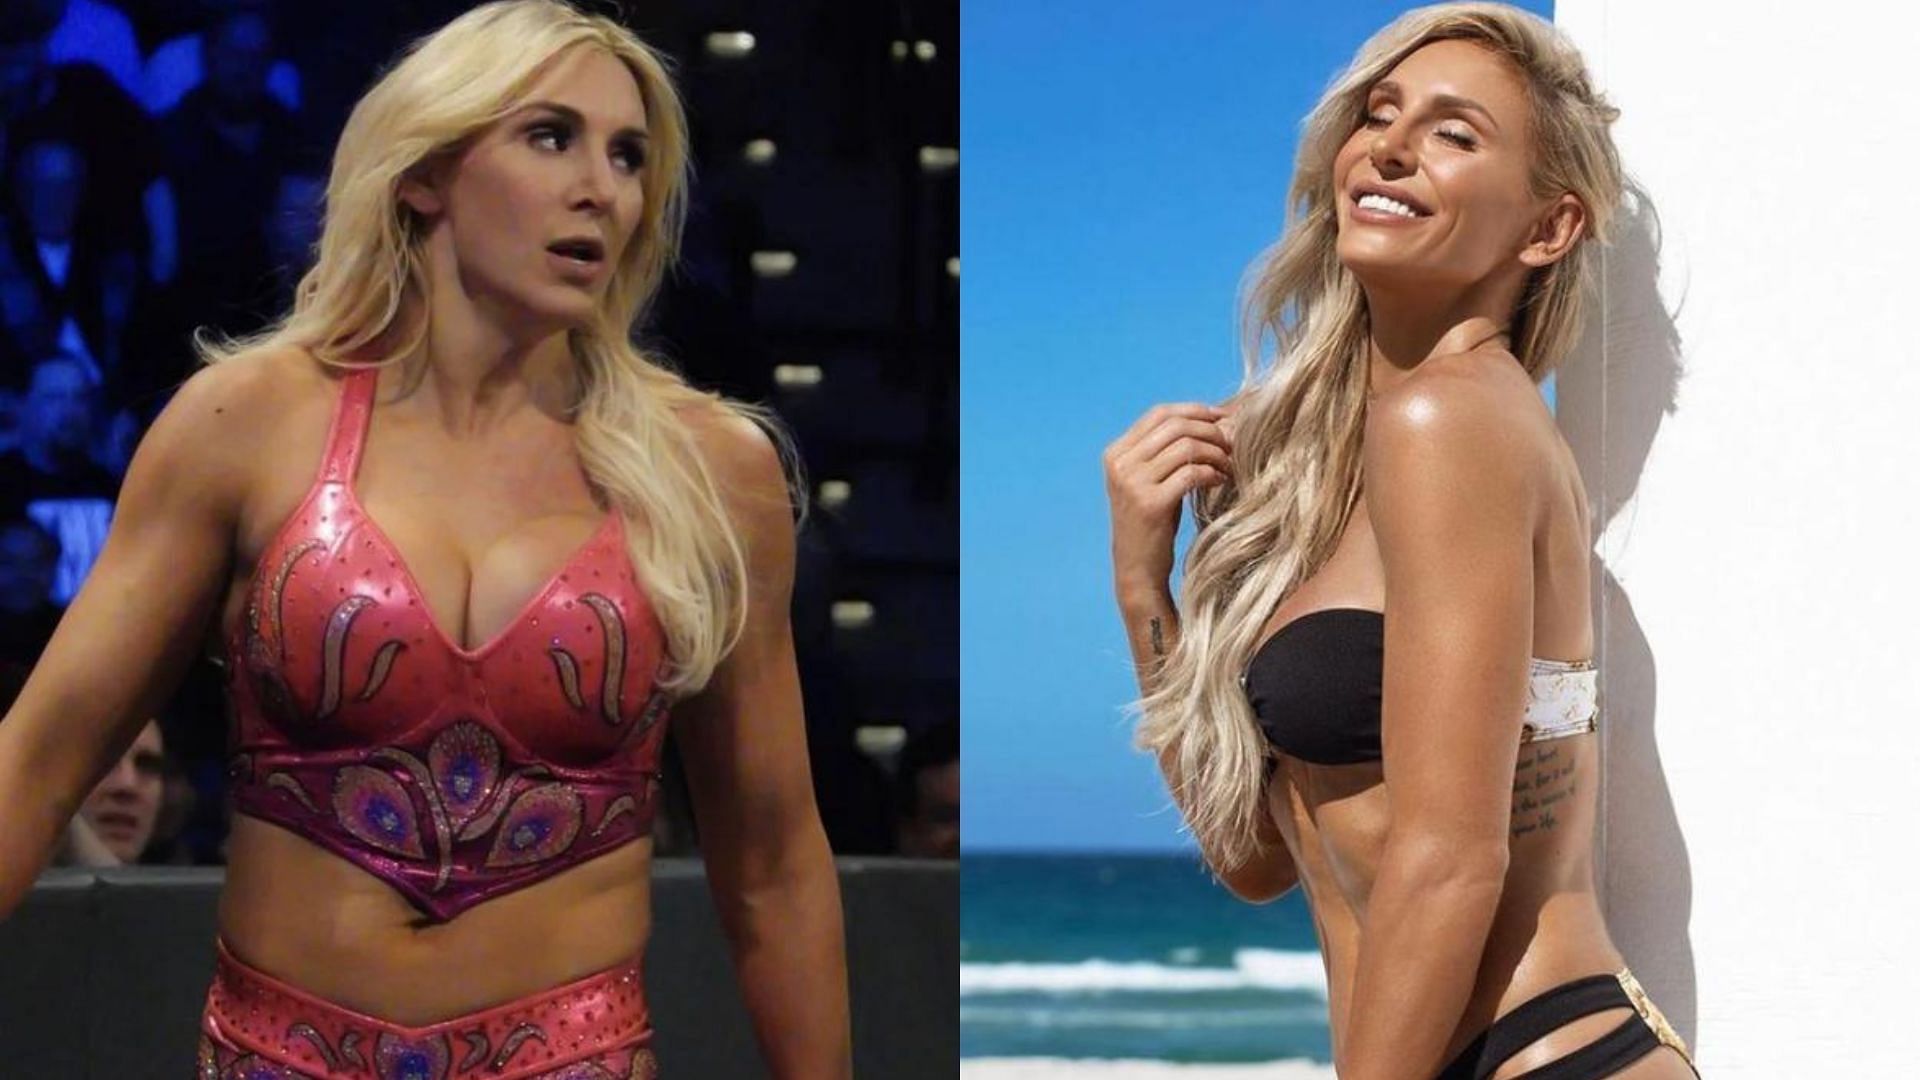 Charlotte Flair recently made her WWE return